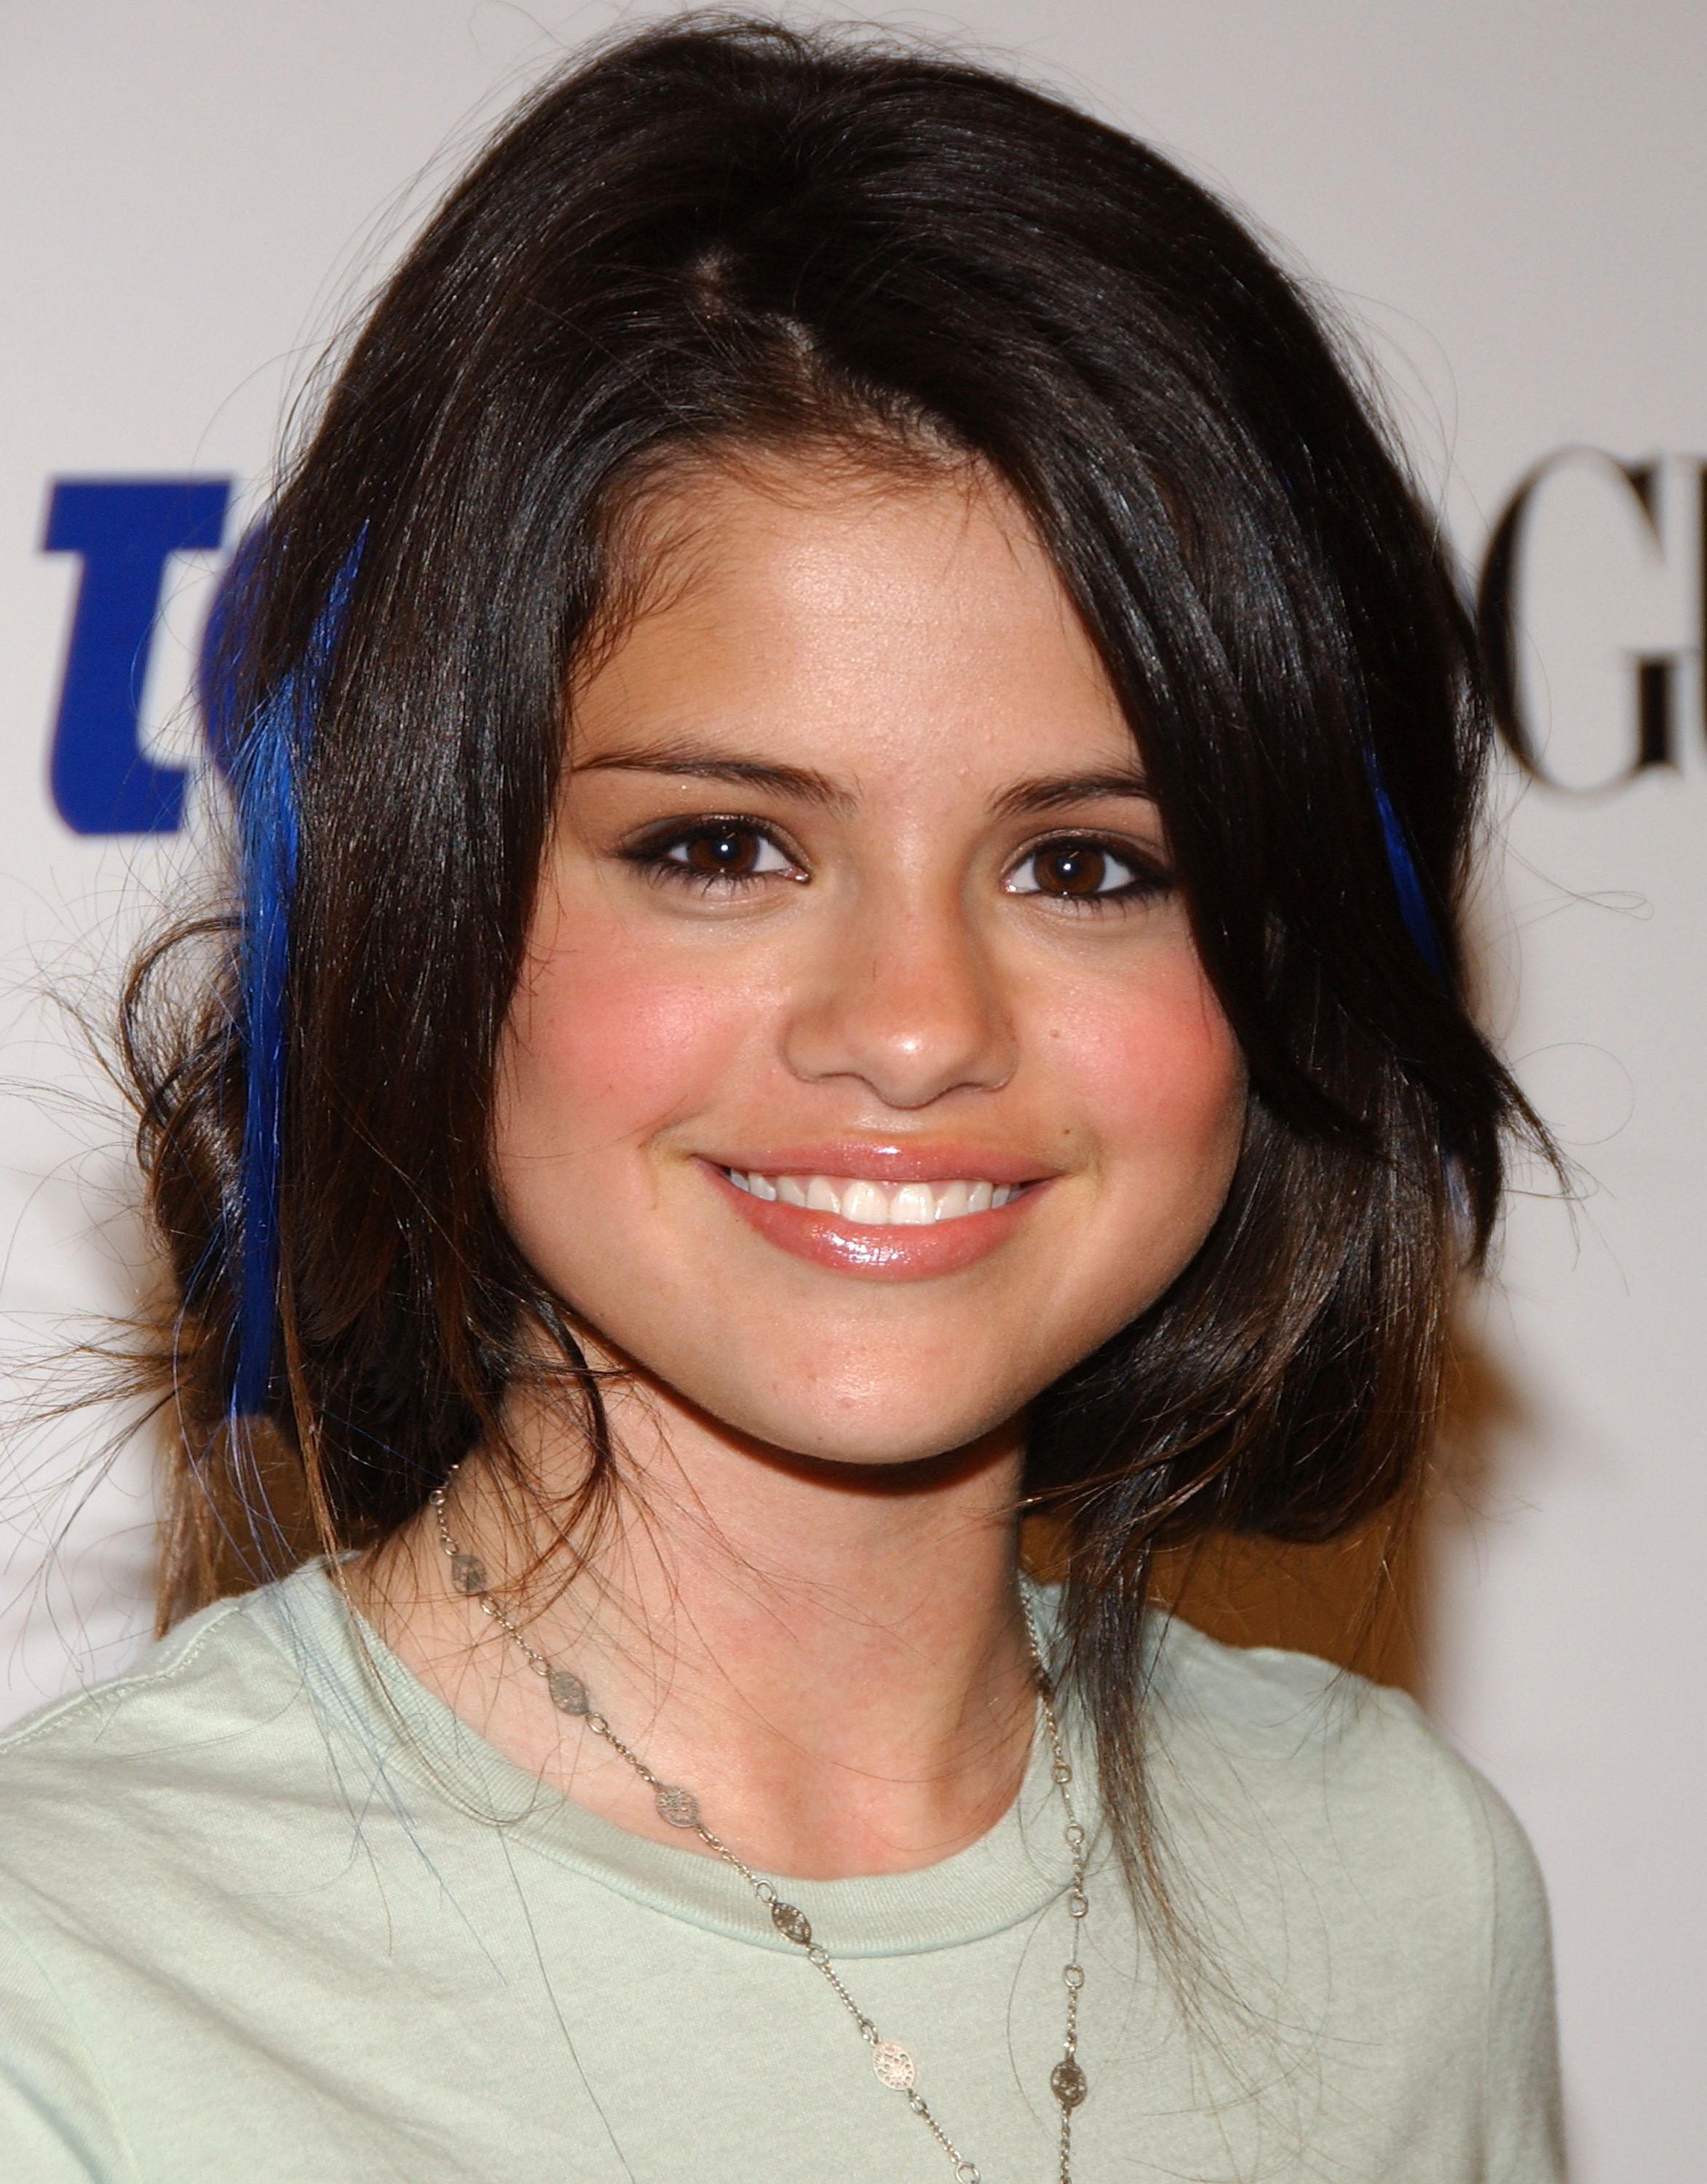 Selena Gomez is photographed with a streak of blue hair at the 2007 Teen Vogue young Hollywood party